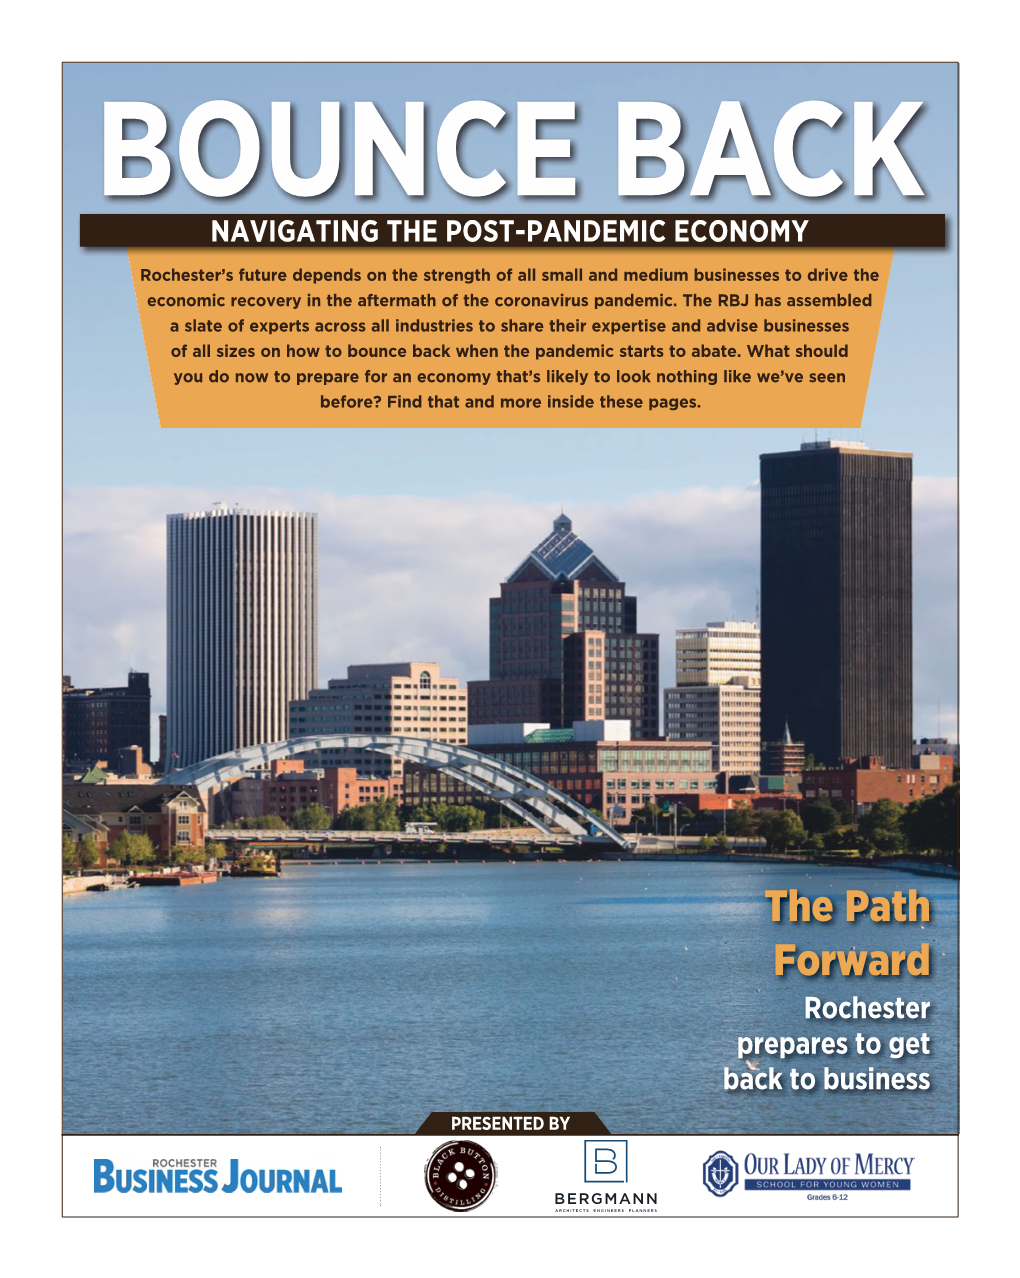 The Path Forward Rochester Prepares to Get Back to Business